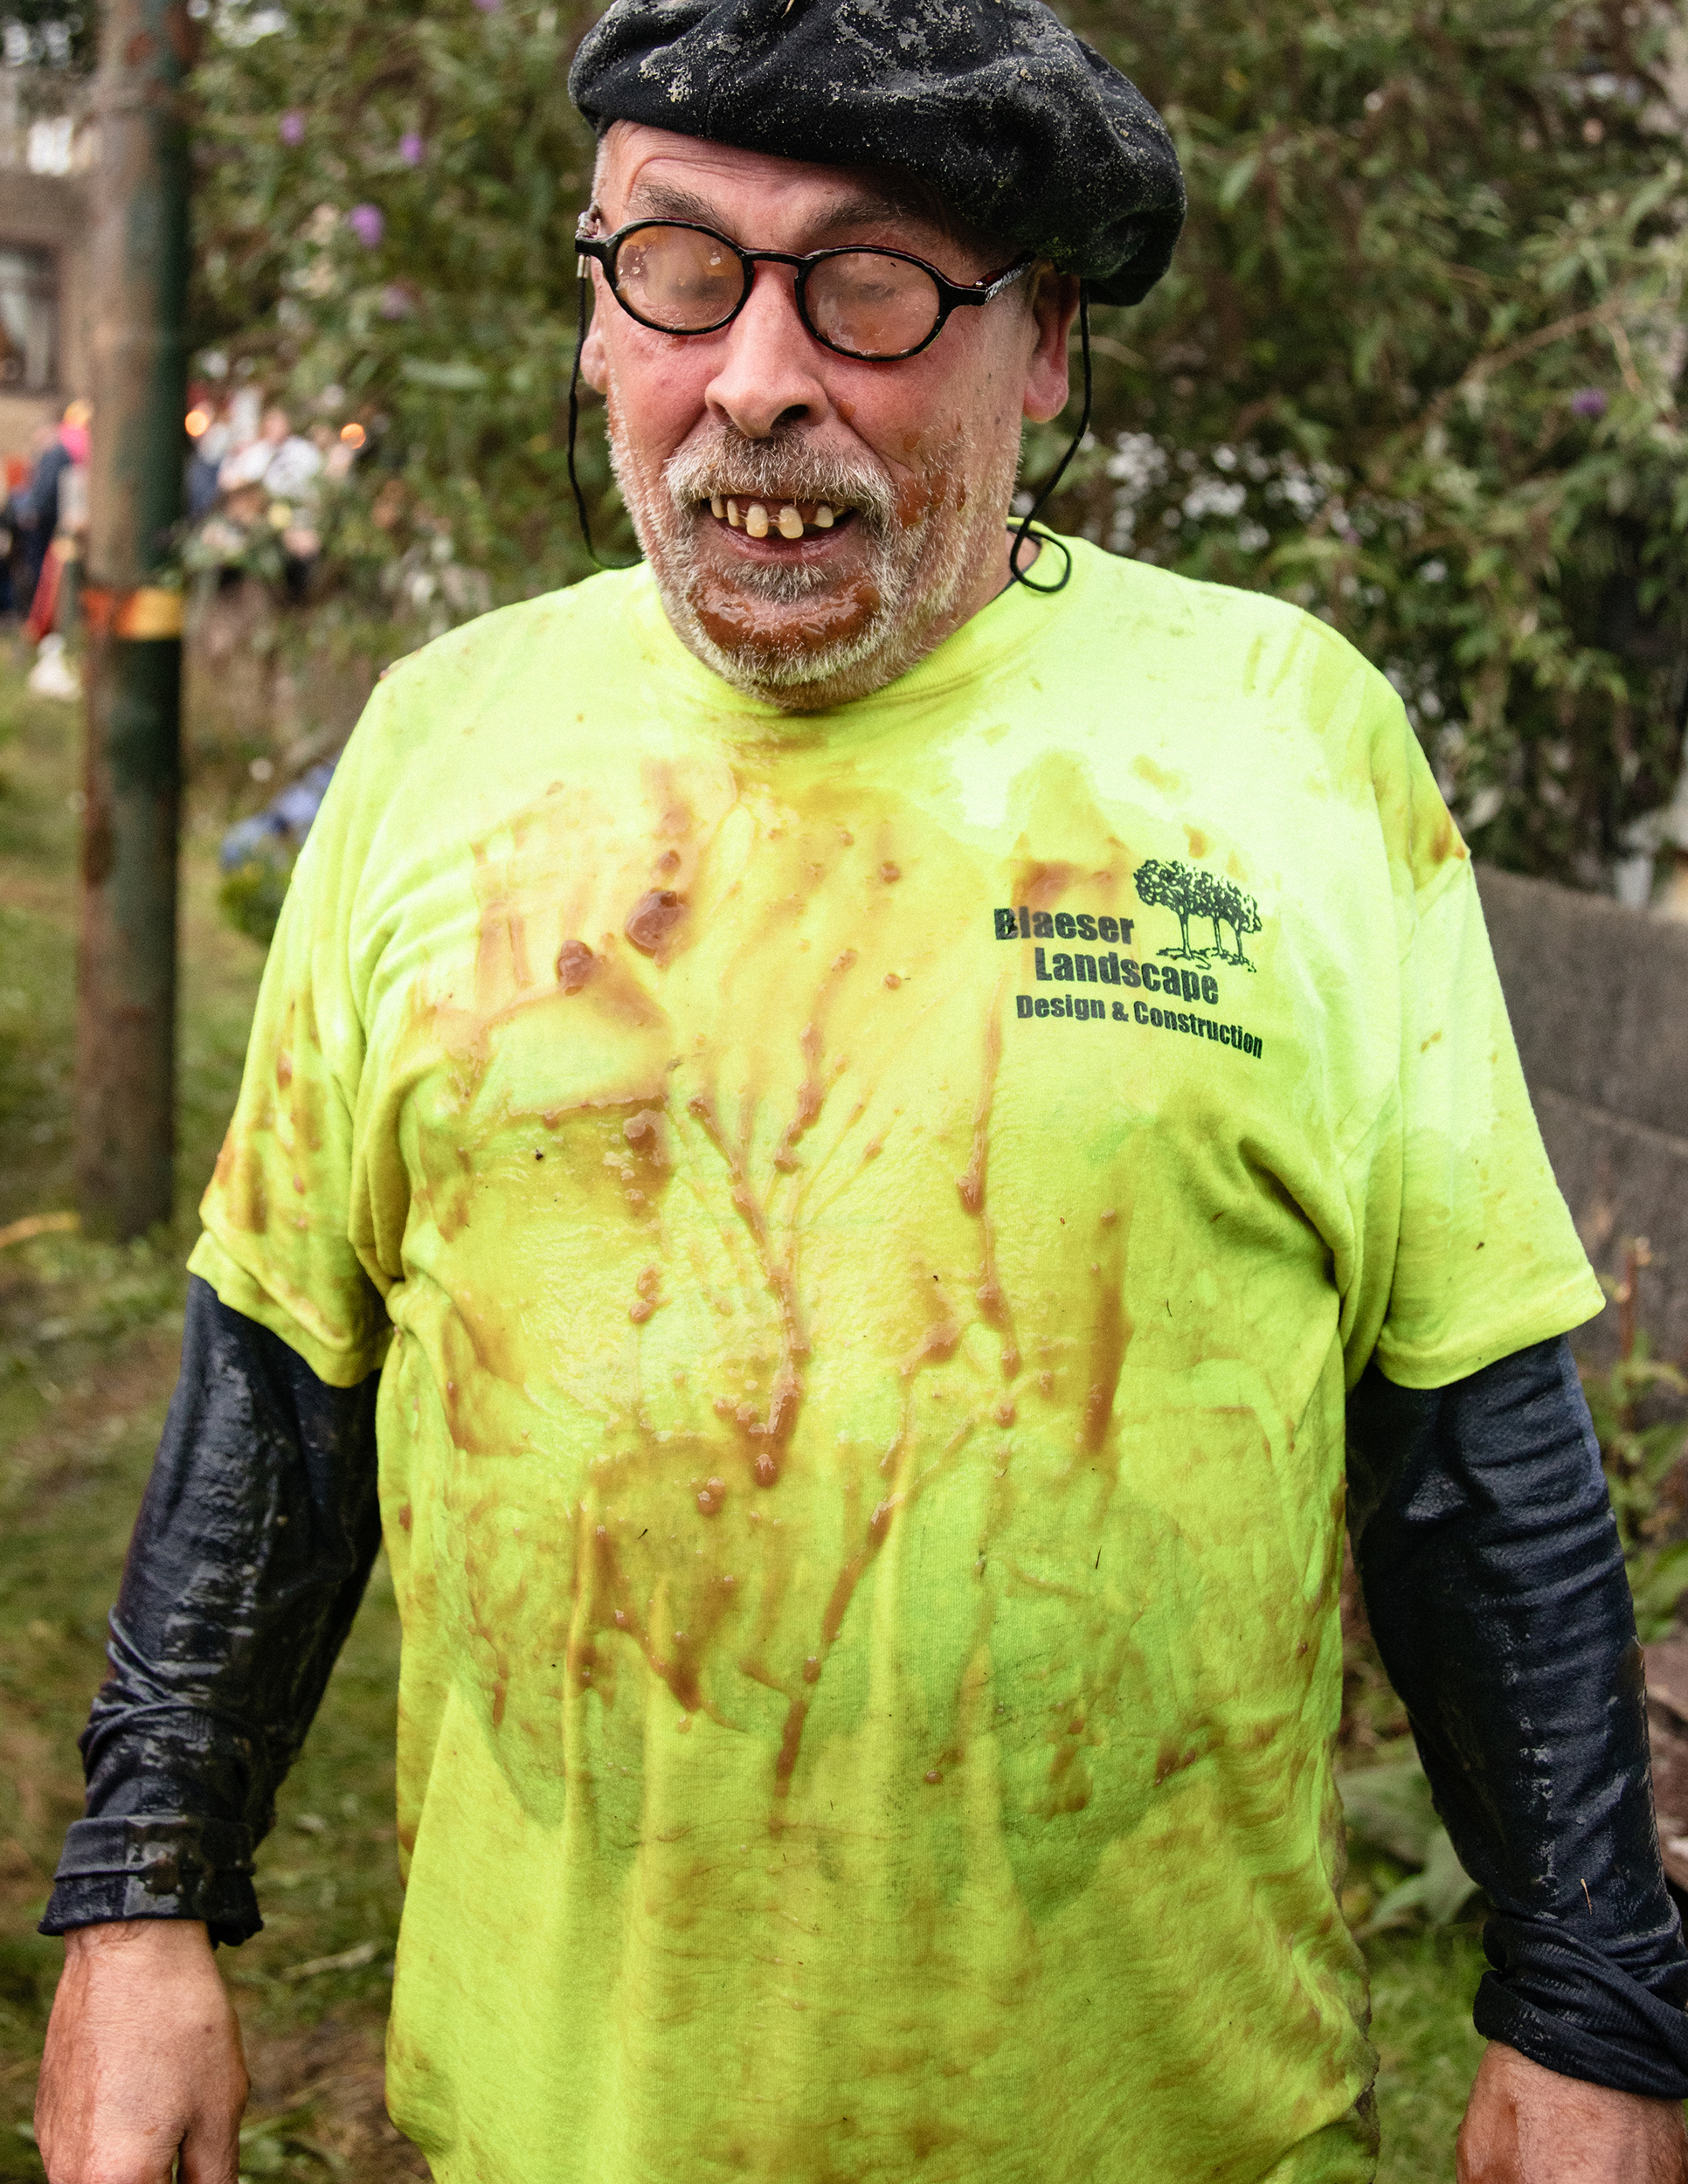 world gravy championships - a portrait of a man in a beret with joke false teeth covered in mud.